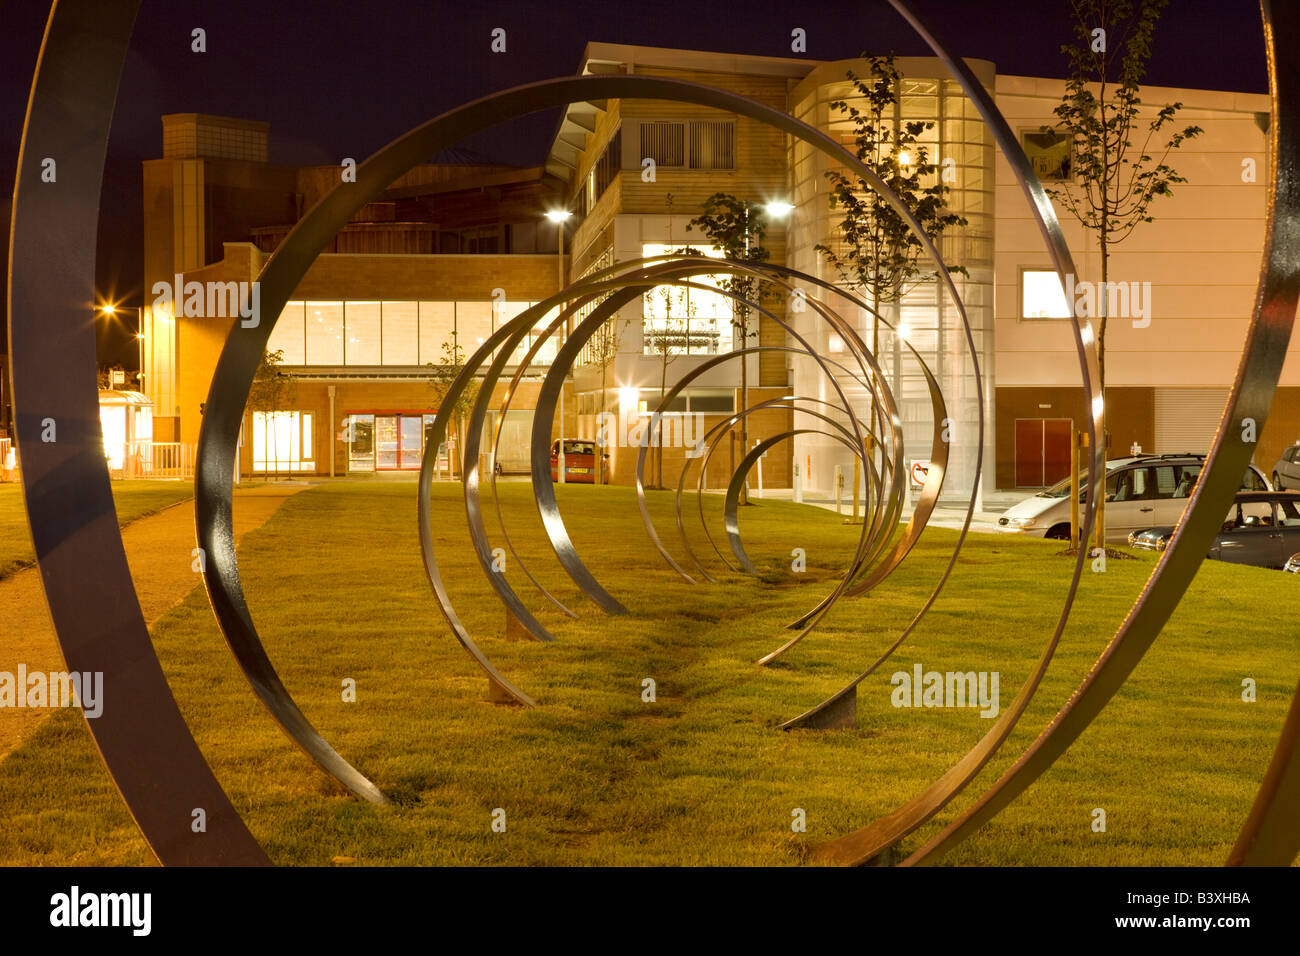 Dumfries town centre the Spring sculpture by Walter Jack at DG1 leisure complex at night Scotland UK Stock Photo